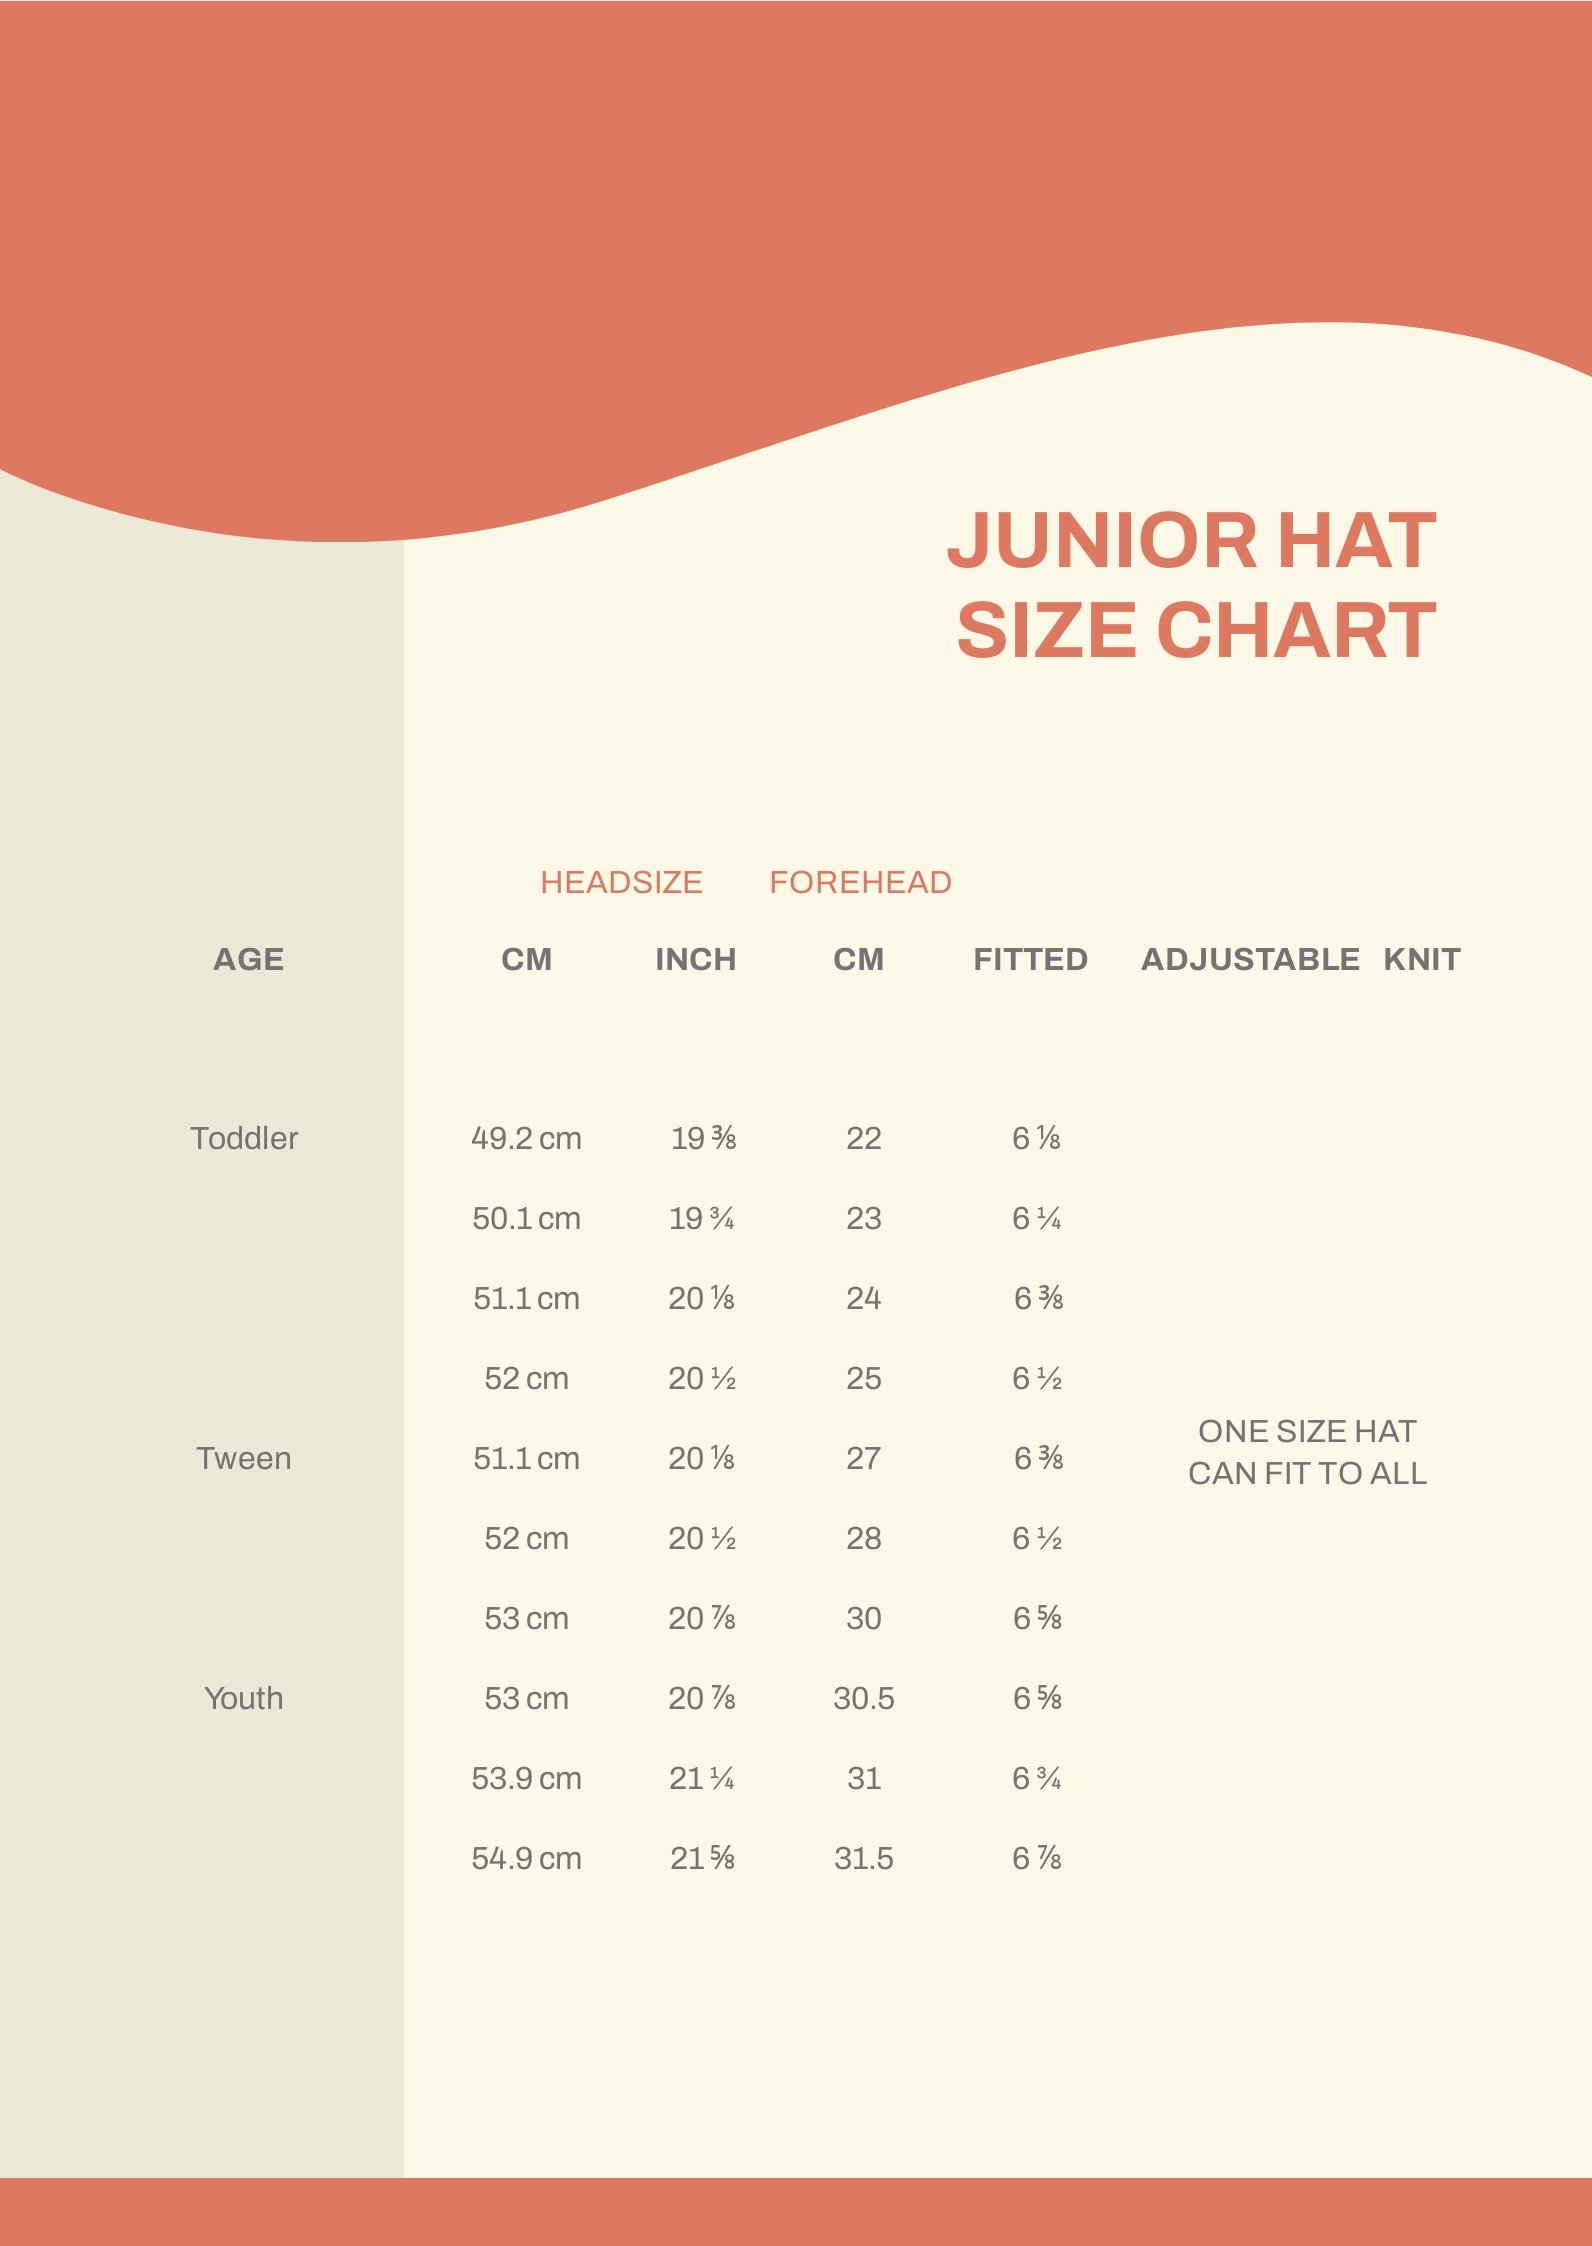 Junior Hat Size Chart in PDF - Download | Template.net